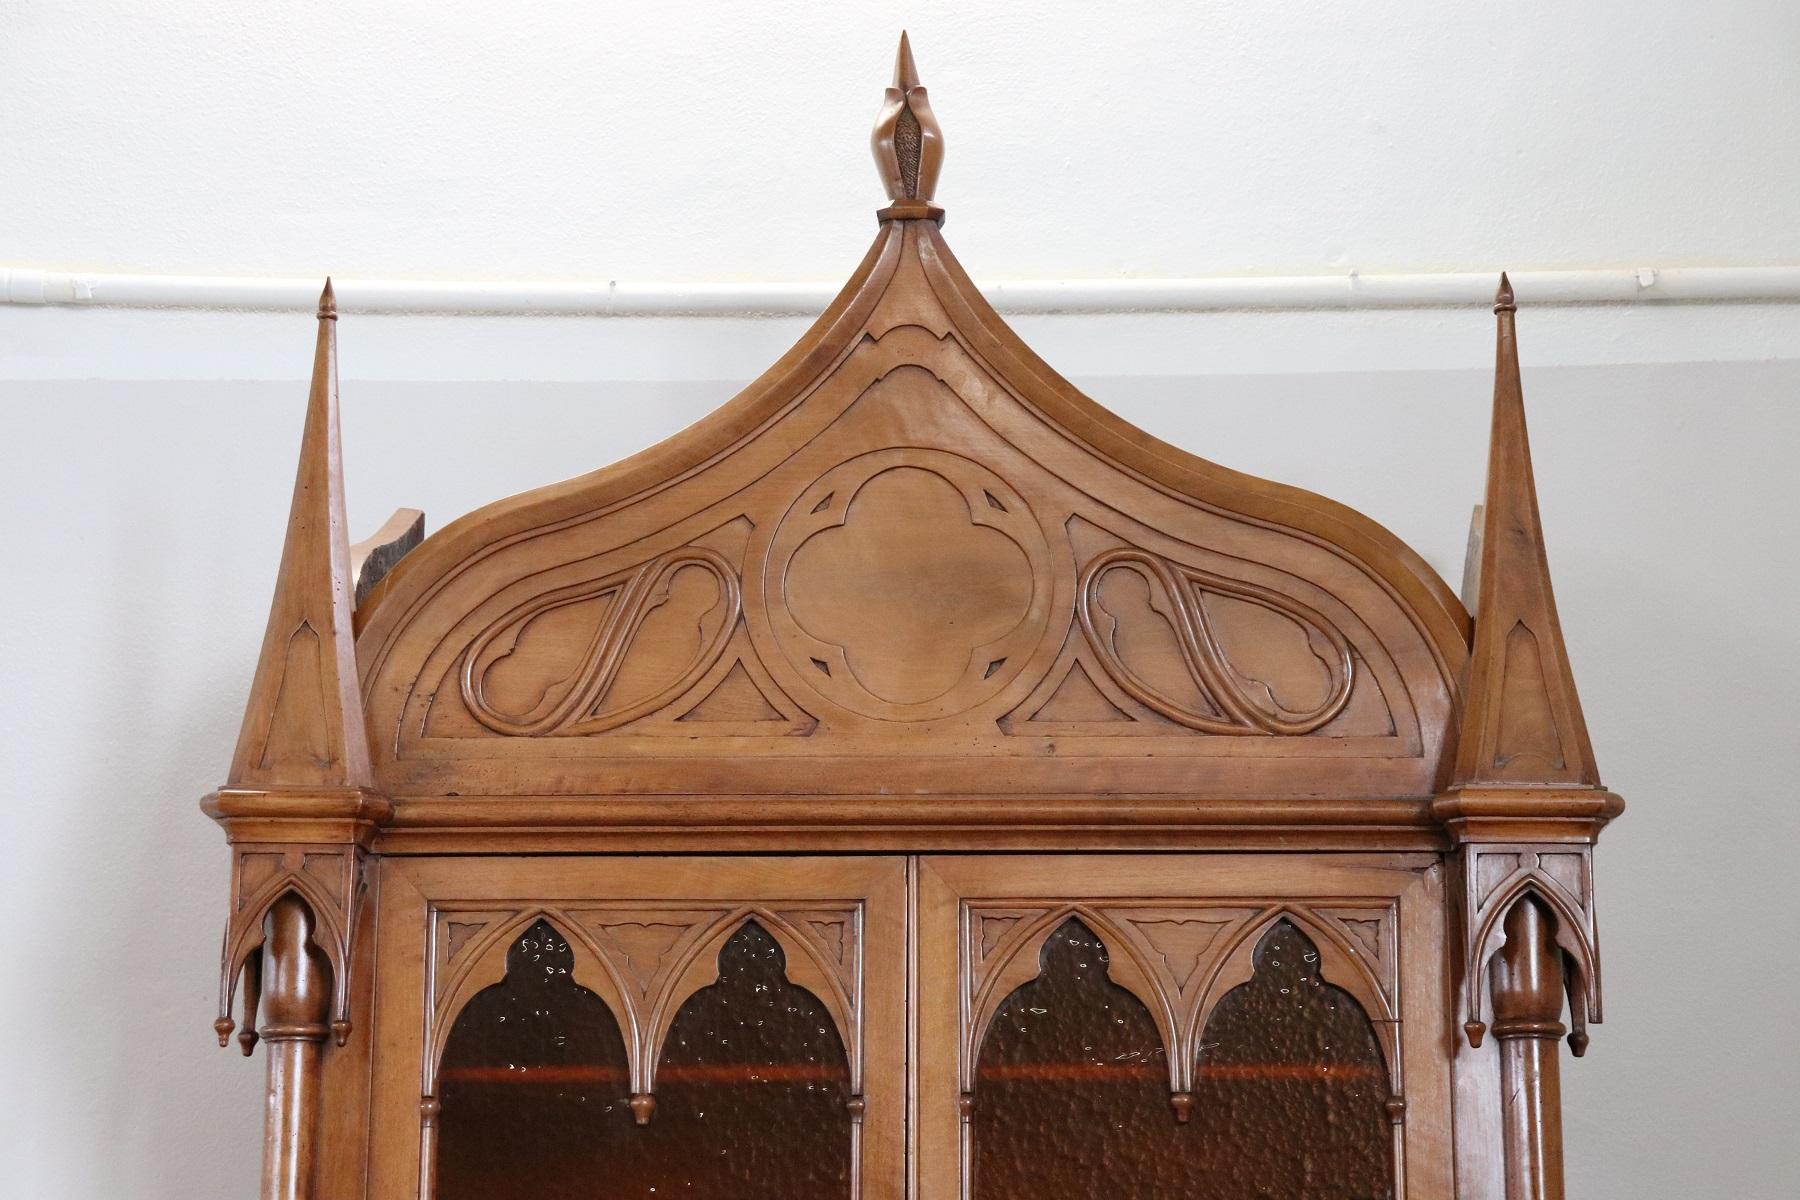 Impressive antique 19th century French Gothic style bookcase or sideboard:
Made entirely of carved walnut wood. The carving work is spectacular made by a great master of wood. We ask you to look at each image in detail to understand the importance